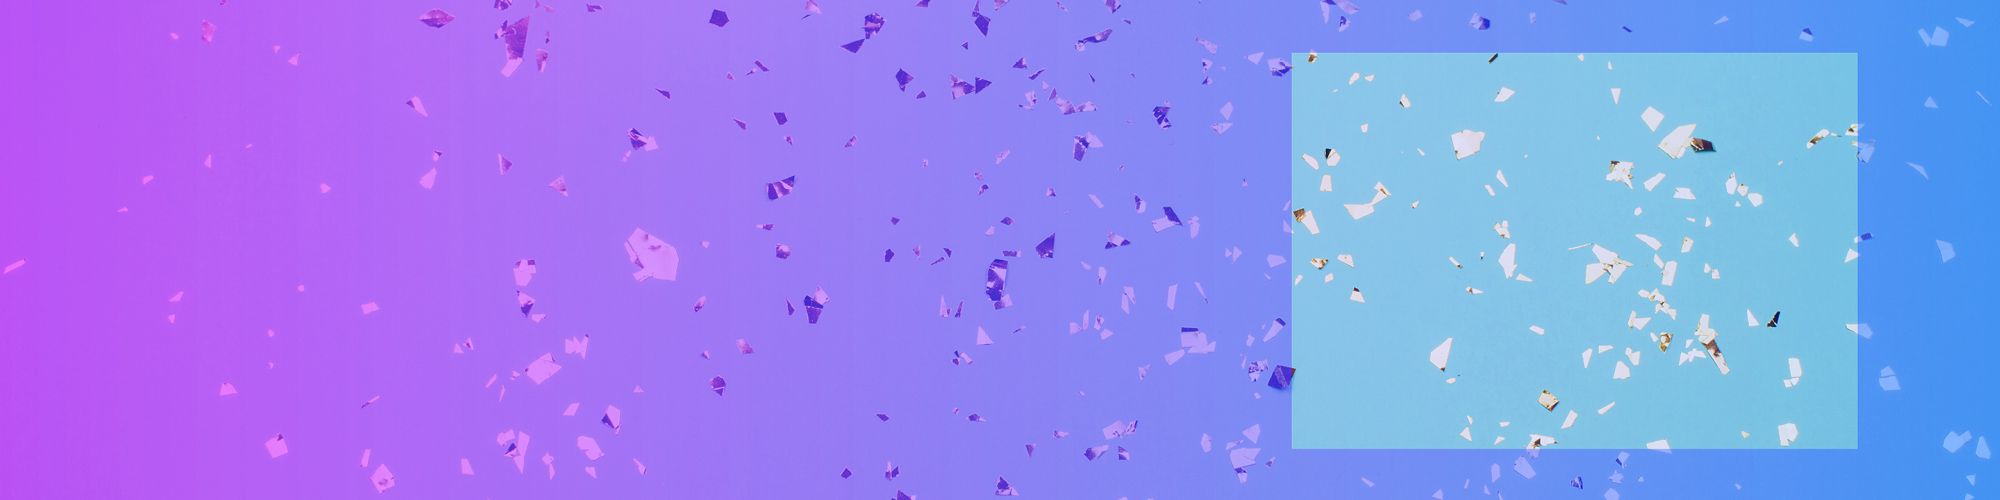 Gold confetti on blue background